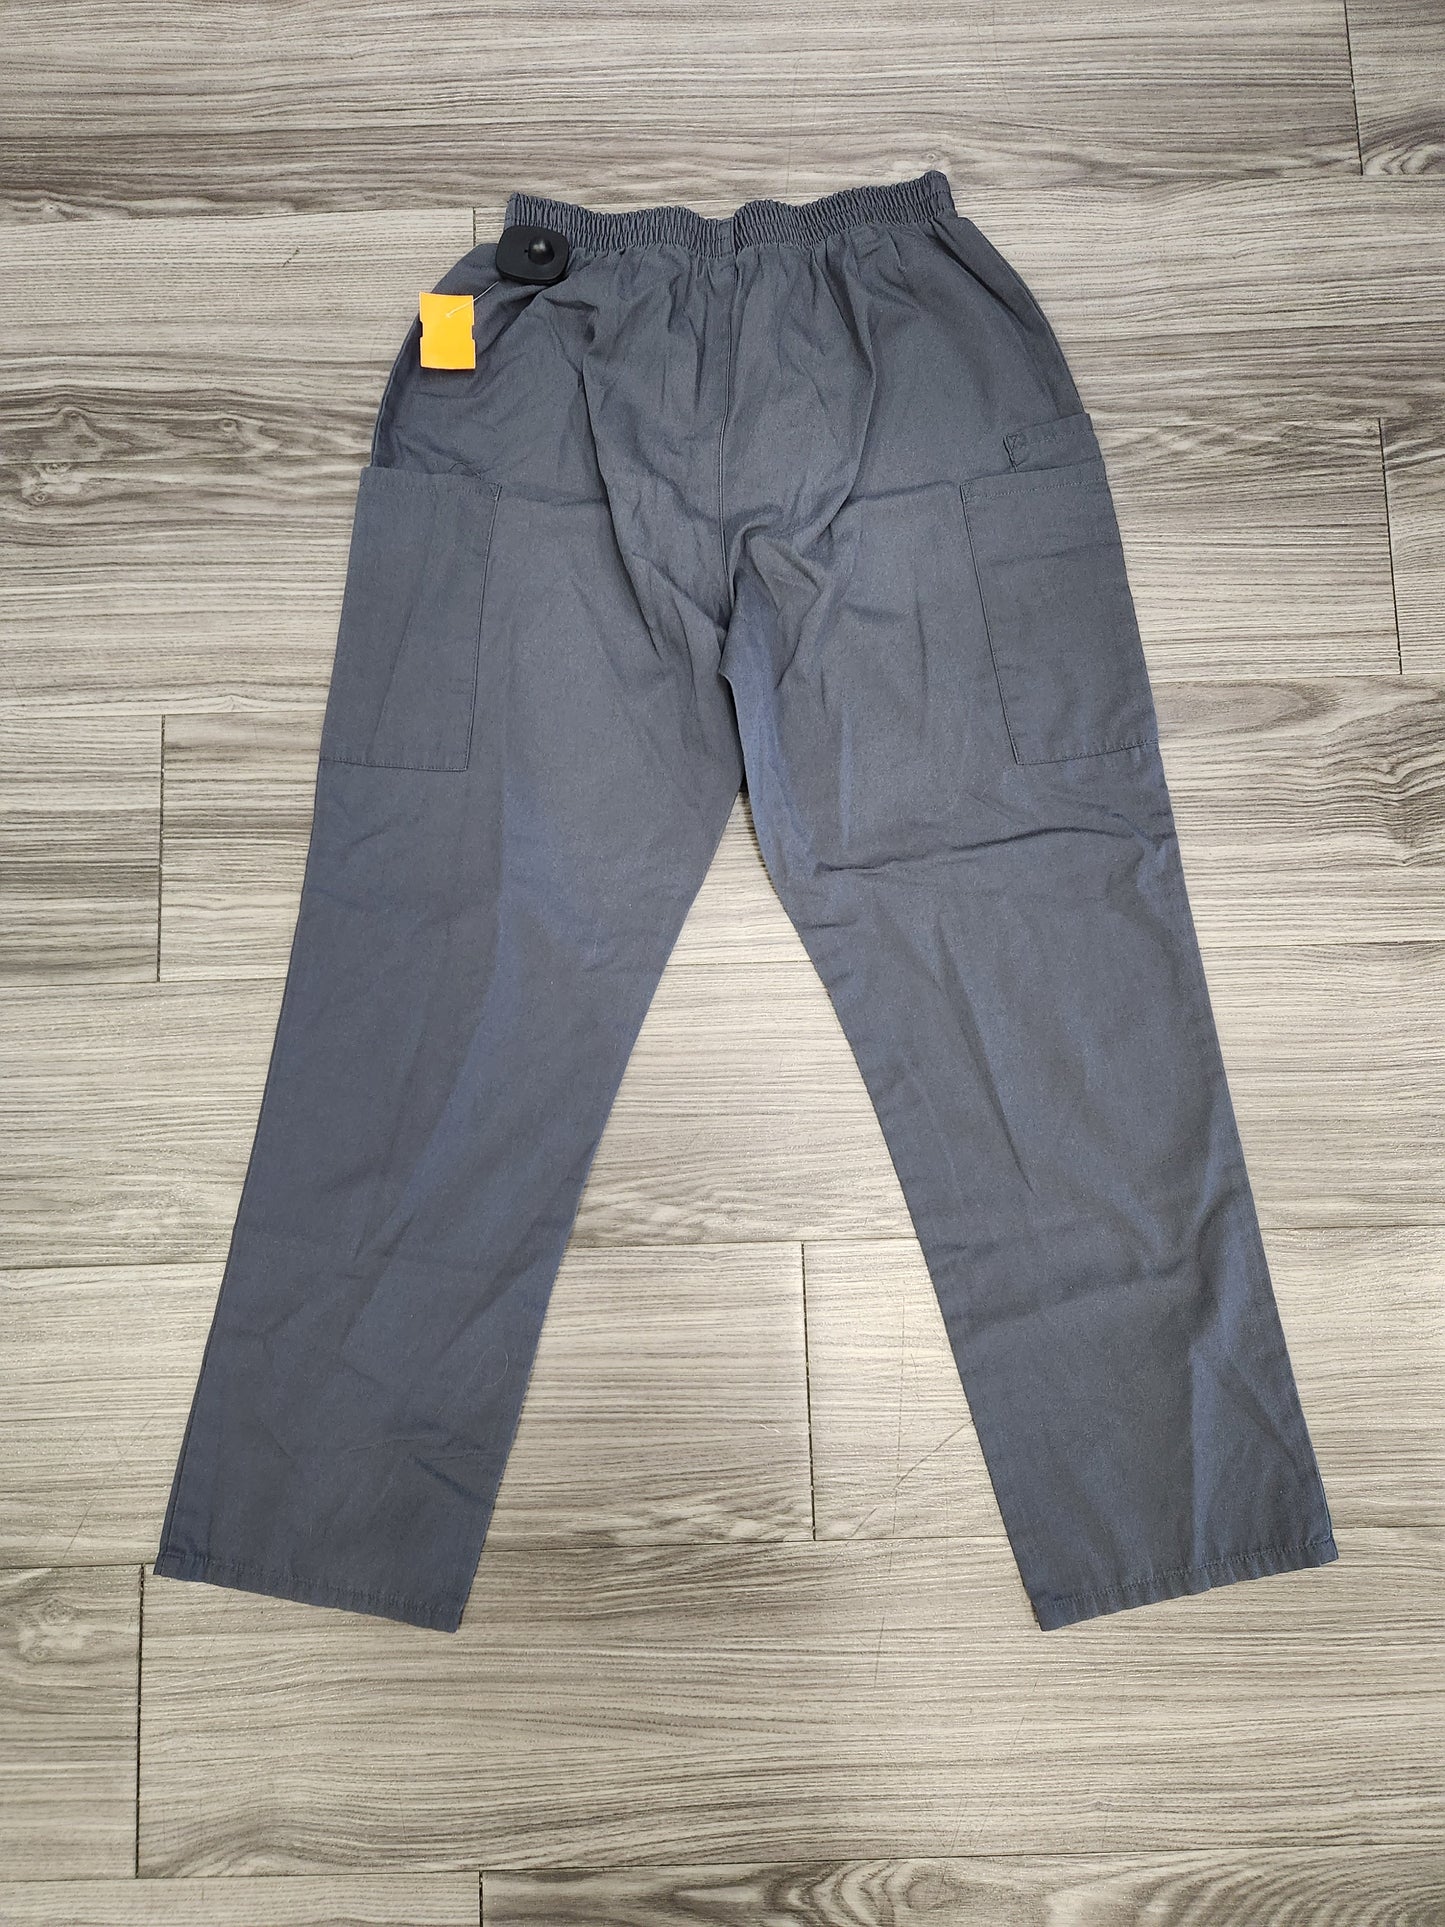 Pants Cargo & Utility By Cherokee  Size: S